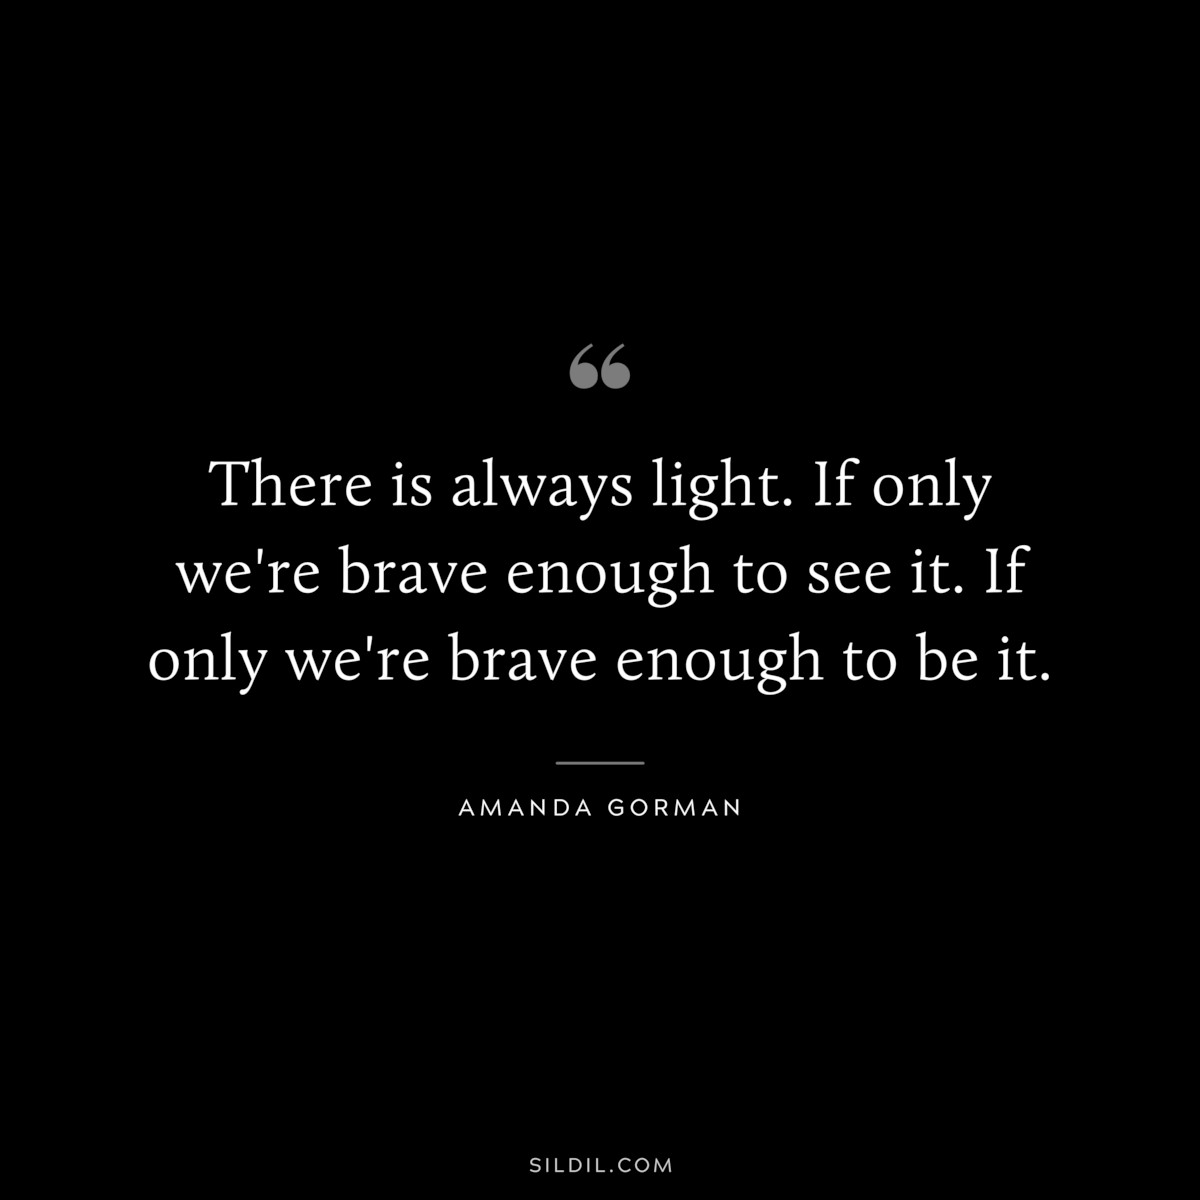 There is always light. If only we're brave enough to see it. If only we're brave enough to be it. ― Amanda Gorman